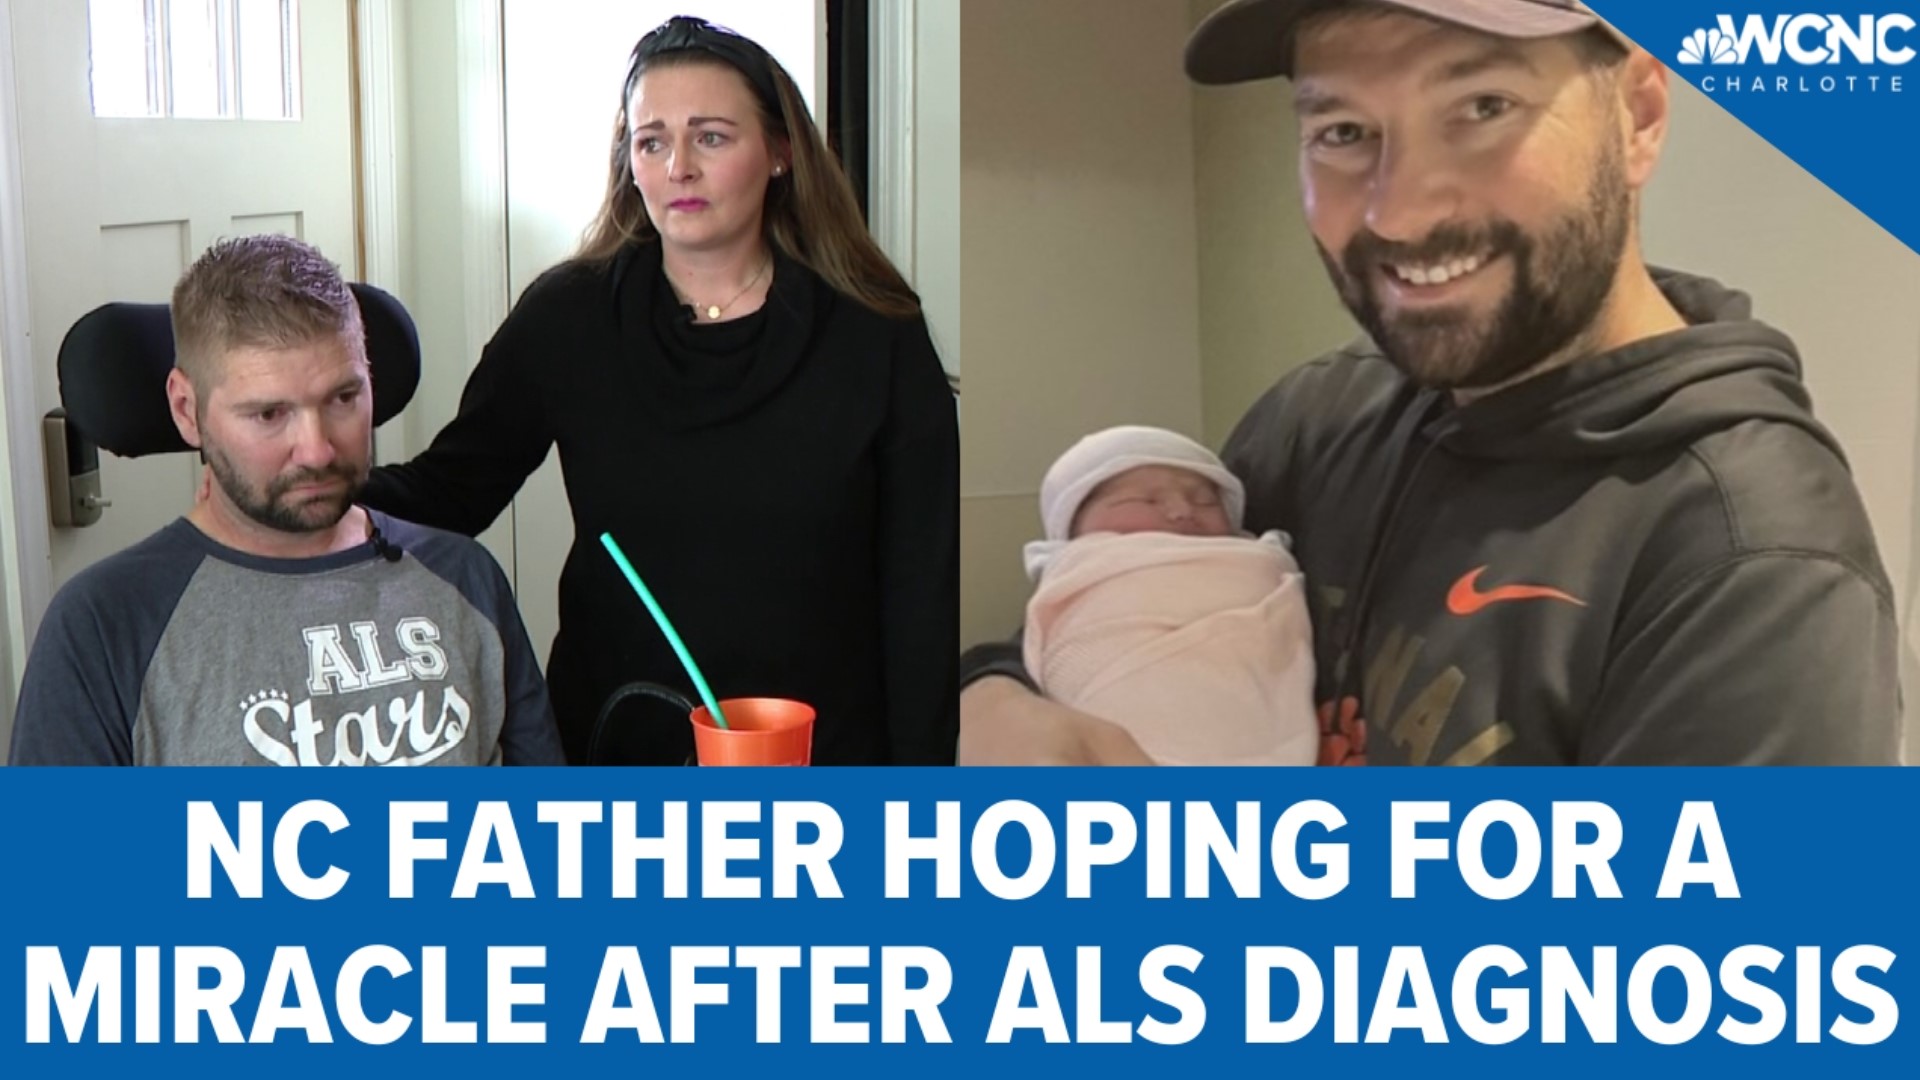 A Charlotte area family is hoping for a miracle this Christmas after a devastating diagnosis for a young father of three.